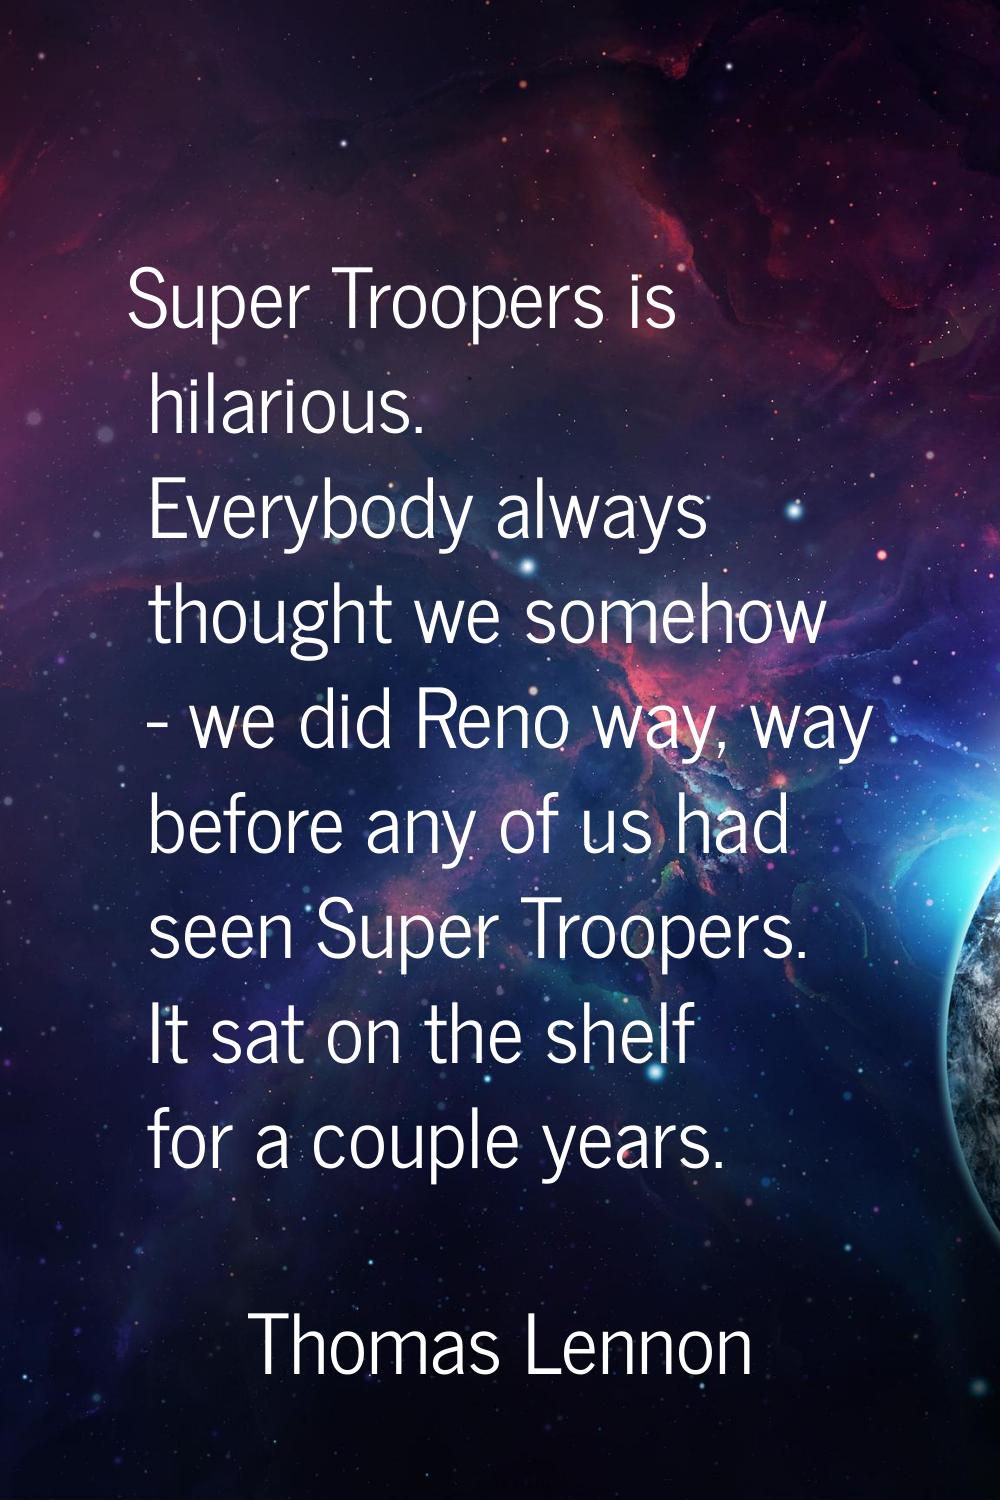 Super Troopers is hilarious. Everybody always thought we somehow - we did Reno way, way before any 